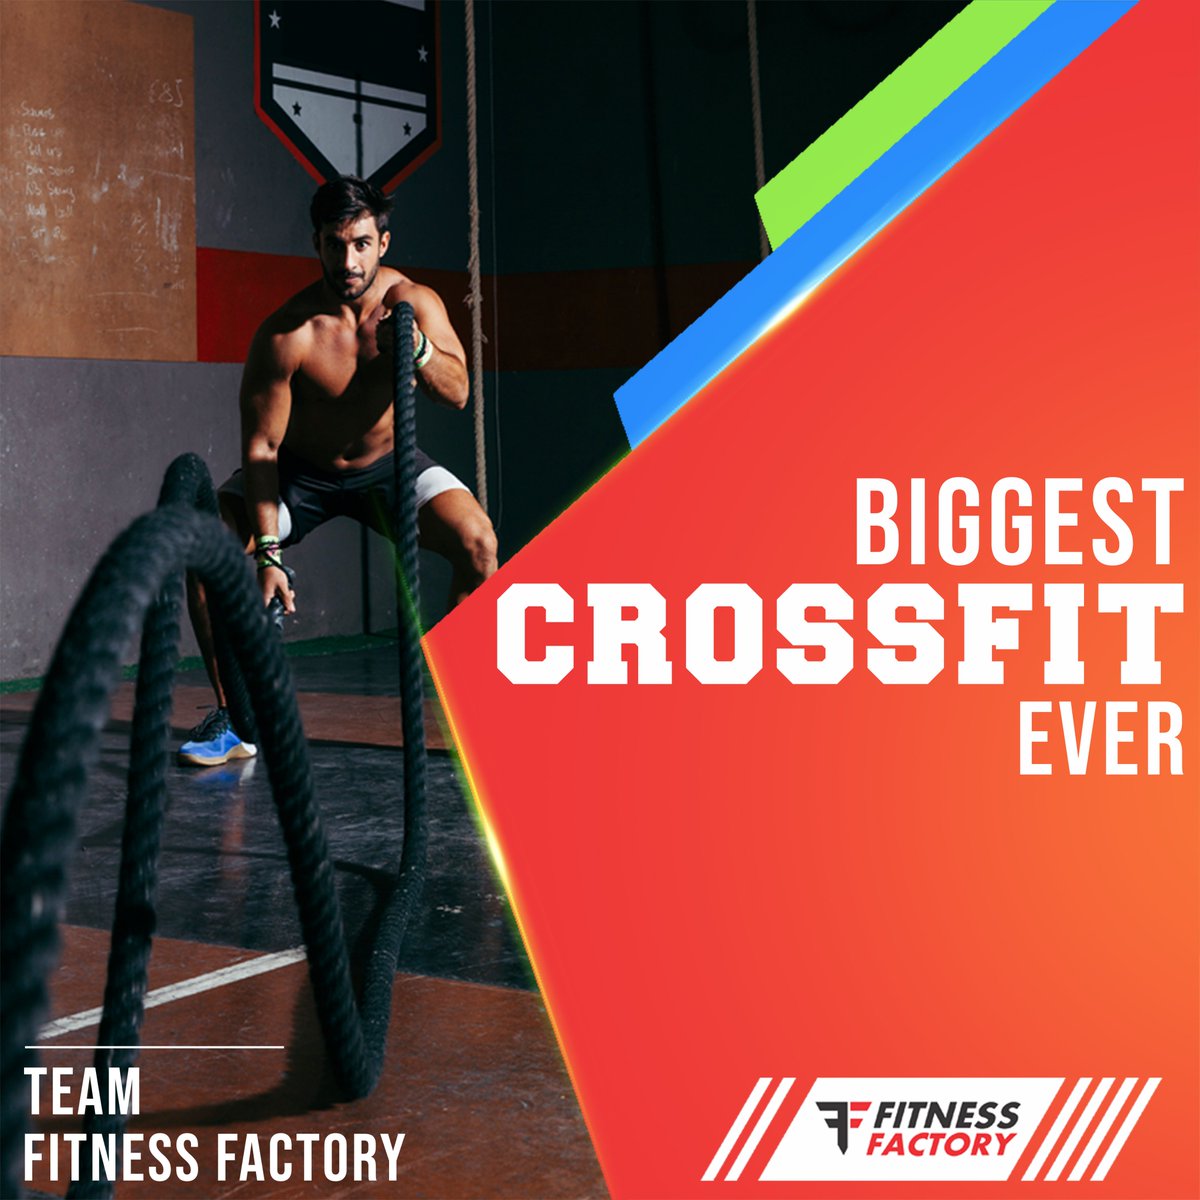 Biggest crossfit ever in mira road 
Enroll now at Fitness Factory
call us at 9076006009
.
. .
#FitnessFactory #miraroad #mirabhayandar #mirabhayander #gym #fitness #transformation #improvement  #musclegain #fattofab #weightloss #fattofitjourney #crossfit #workout #crossfitworkout